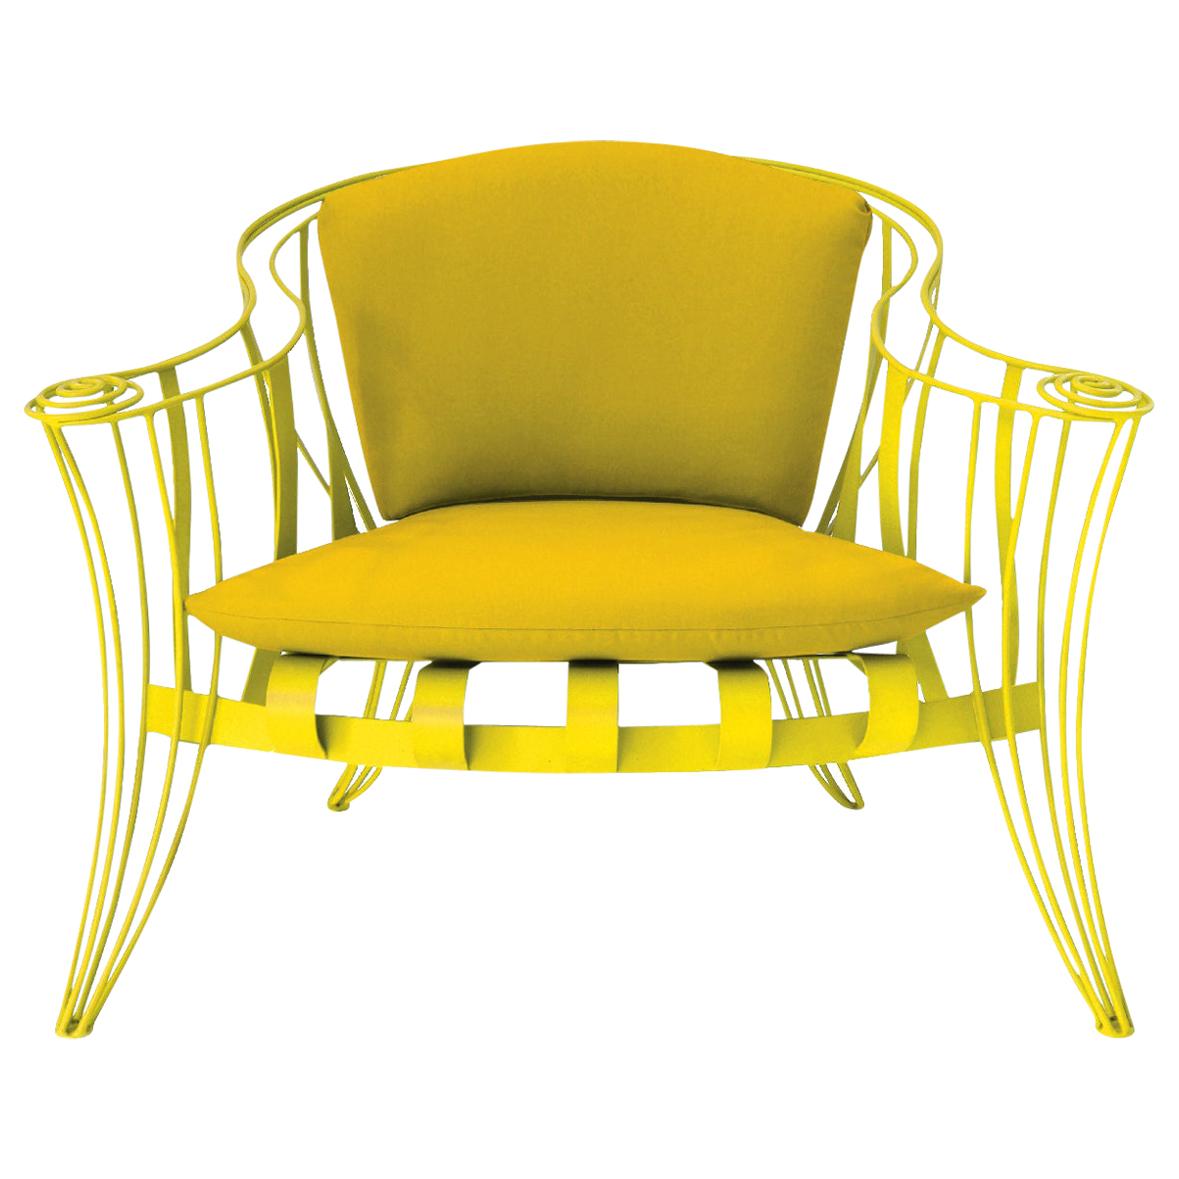 Opus Garden Yellow Armchair by Carlo Rampazzi For Sale